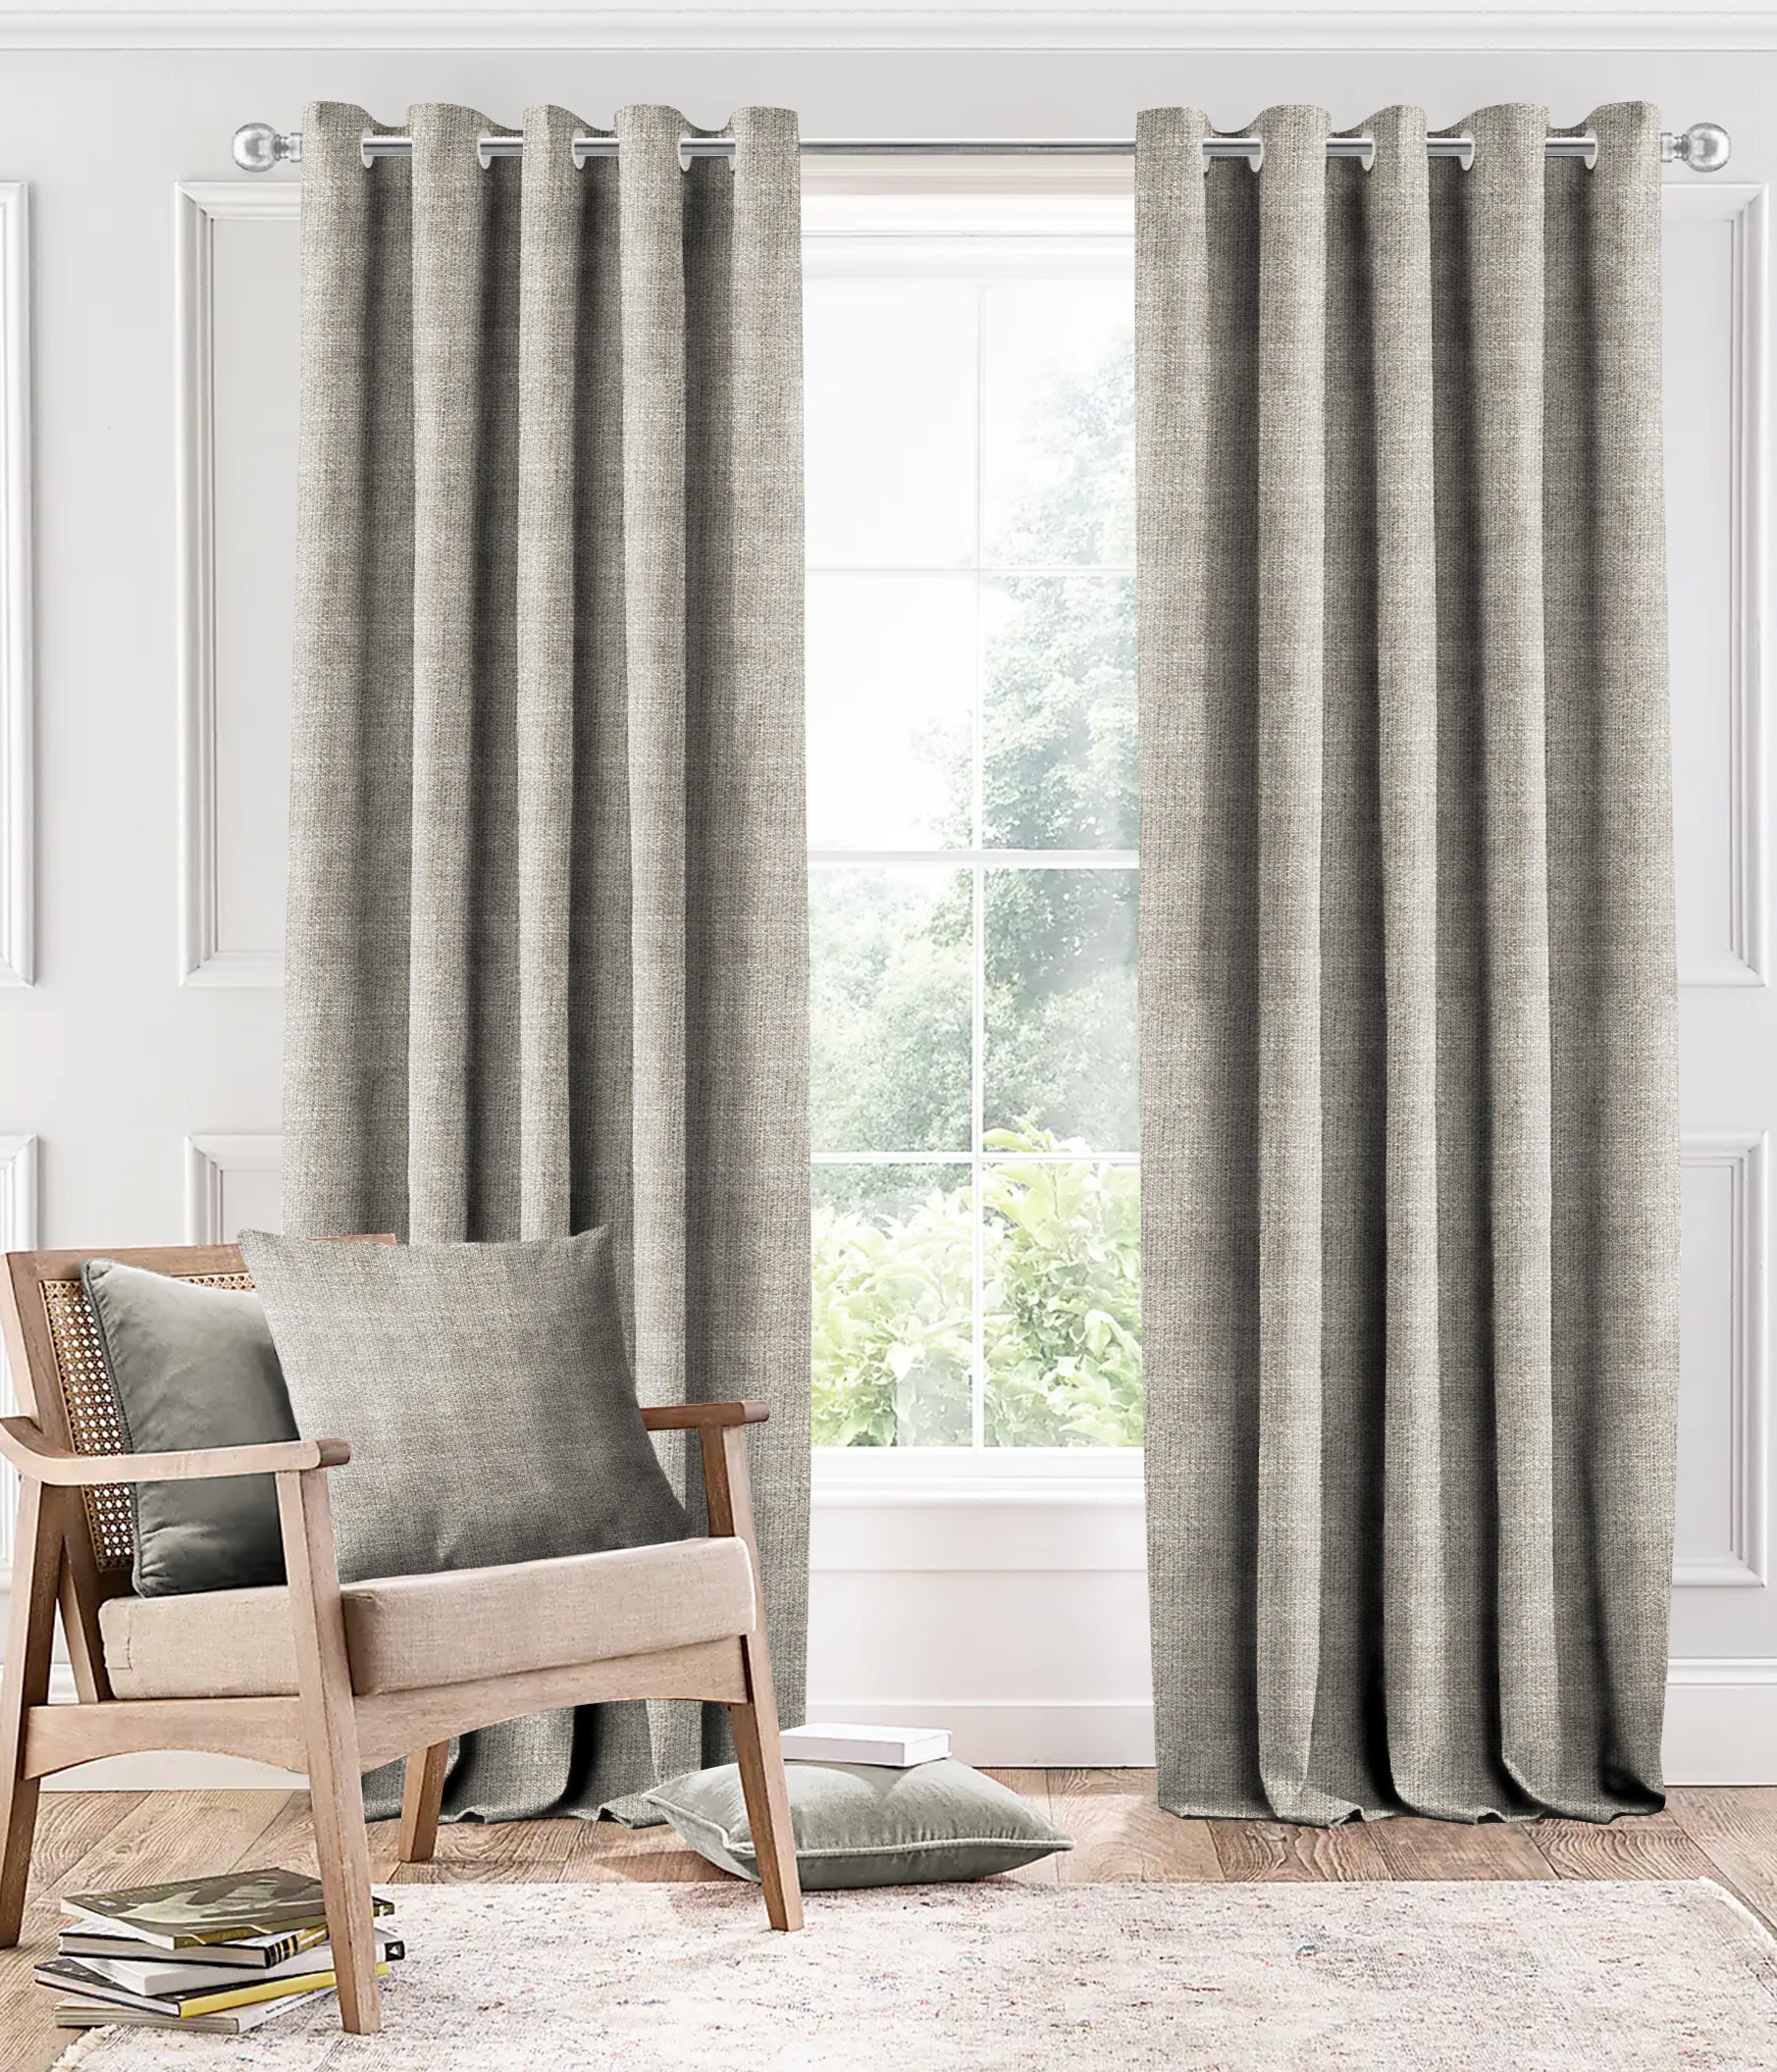 DELUXE GREY BLACKOUT CURTAIN